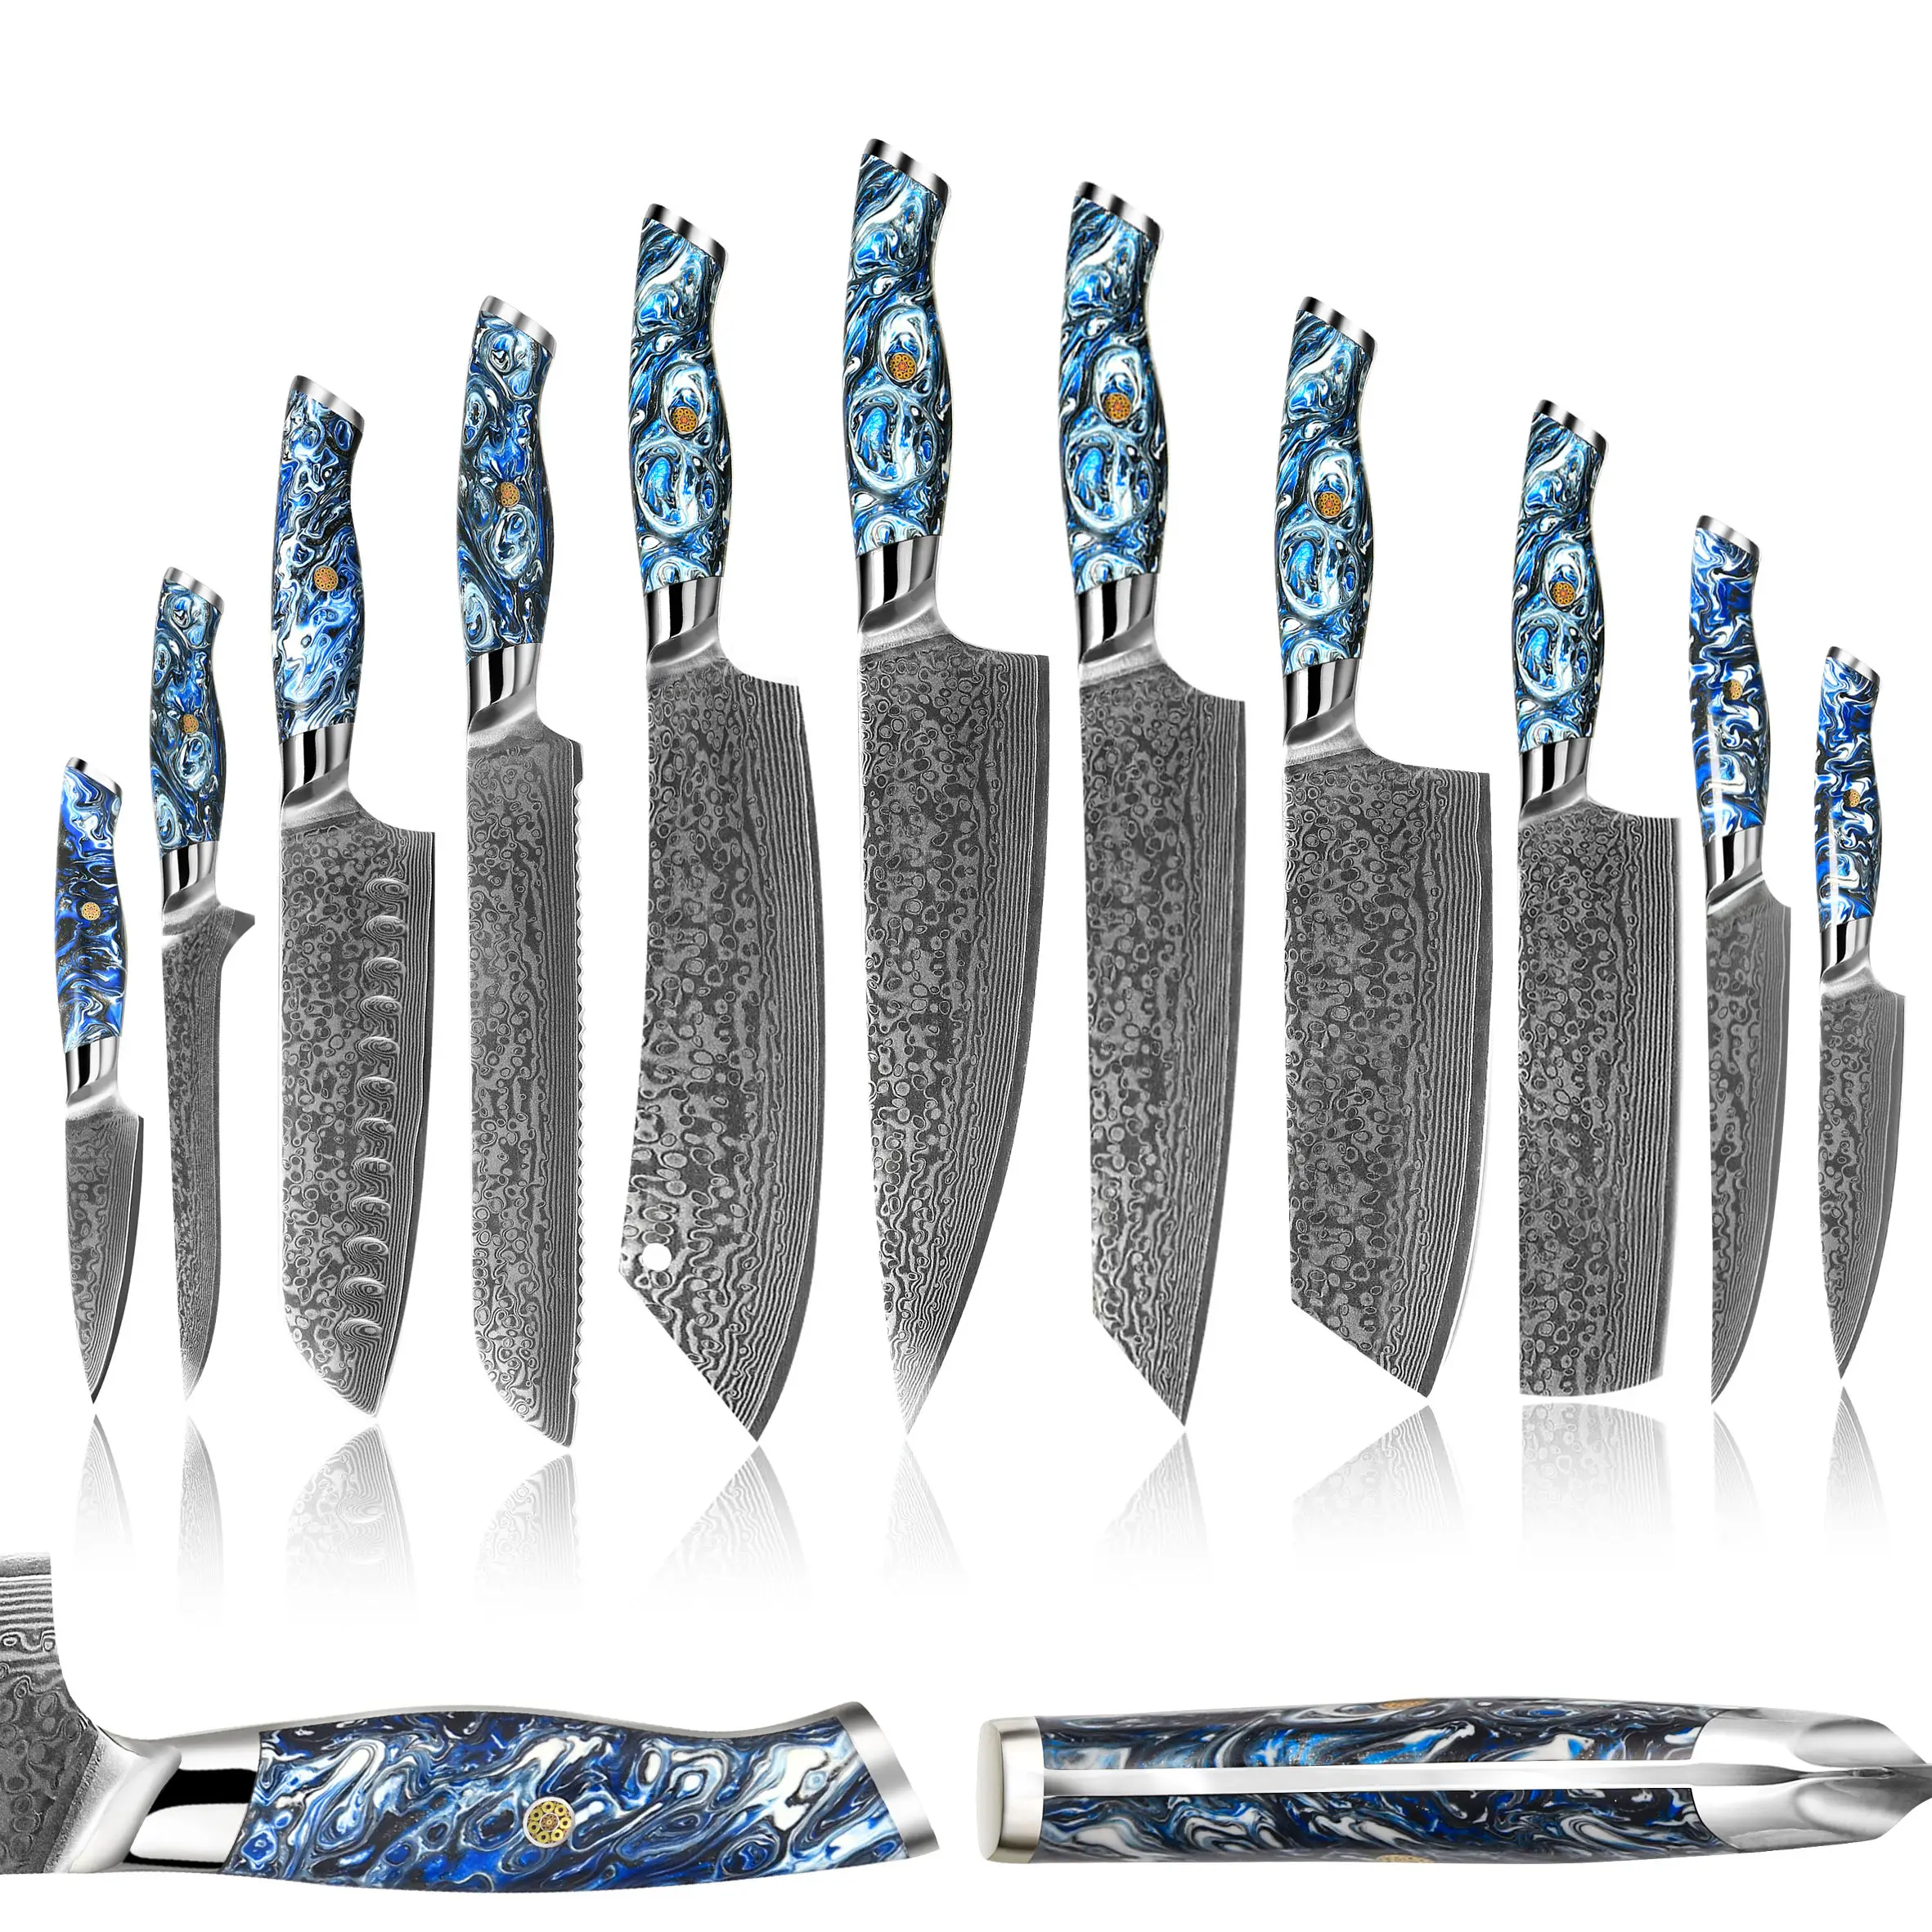 Exquisite 67 layers japanese vg10 damascus kitchen knife set chef knife set with resin handle